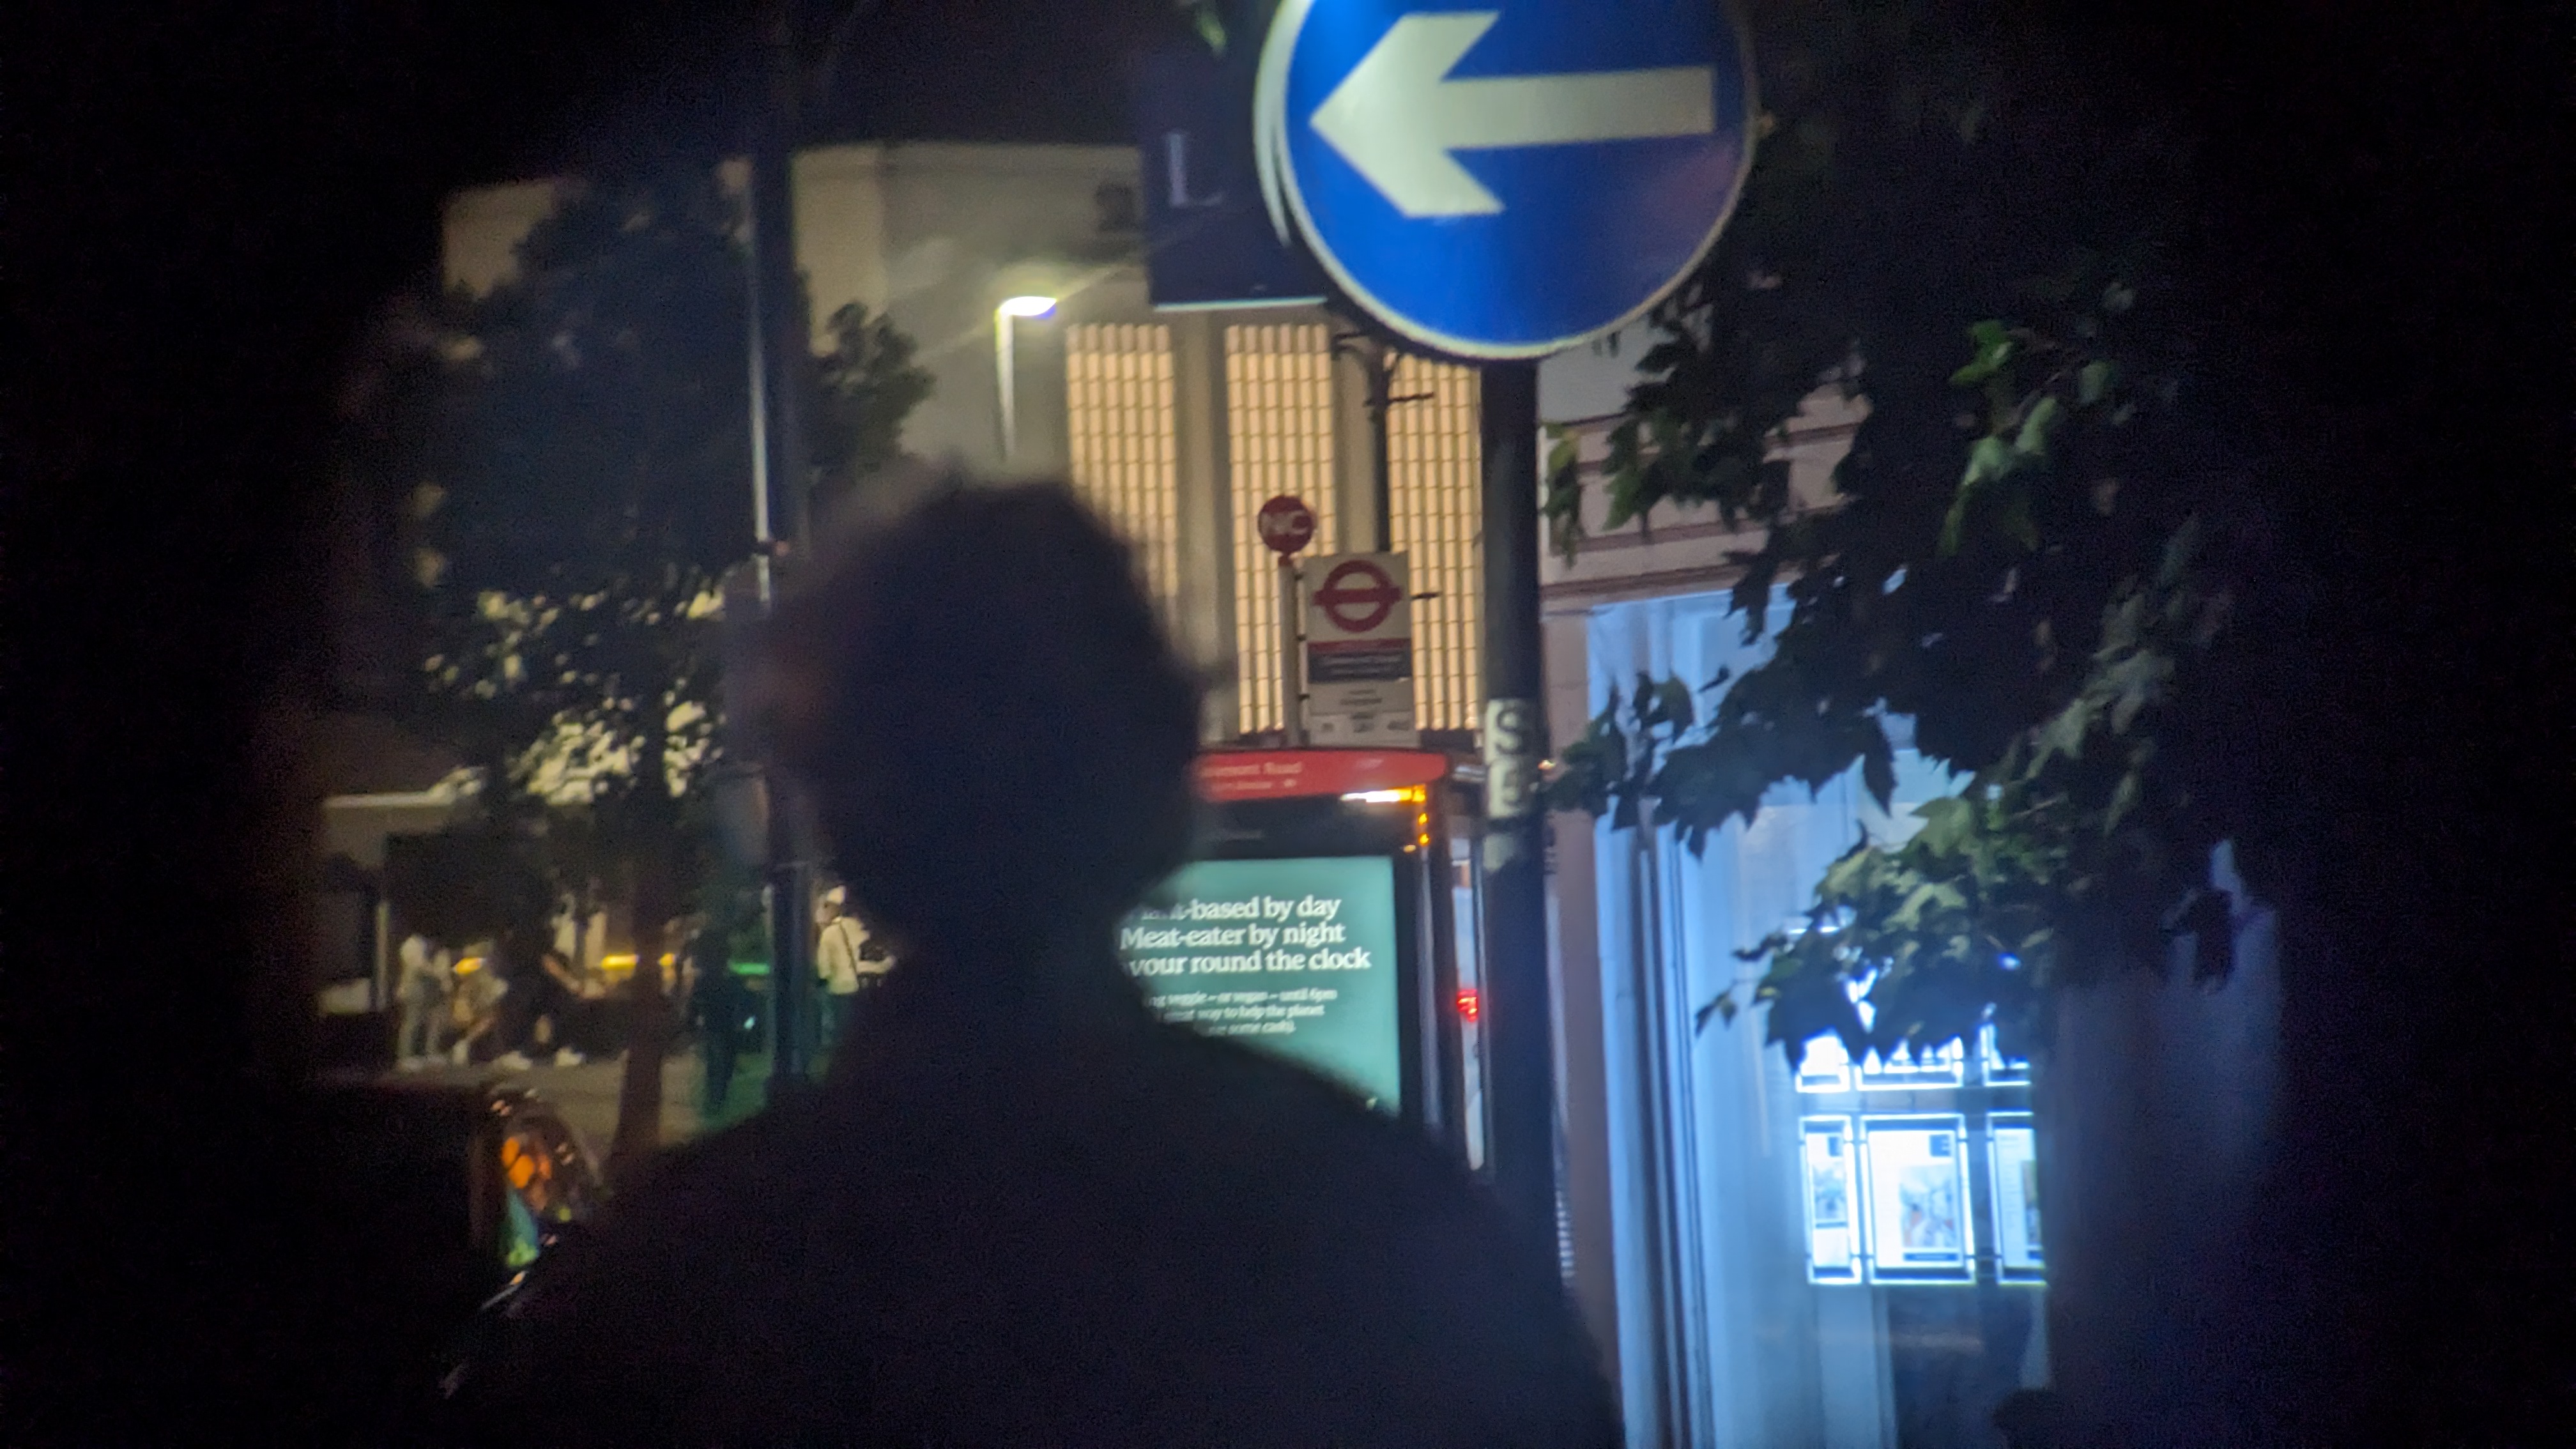 A photograph taken through binoculars of a silhouetted figure walking down a high street at night with traffic signs, a bus stop and trees around them.